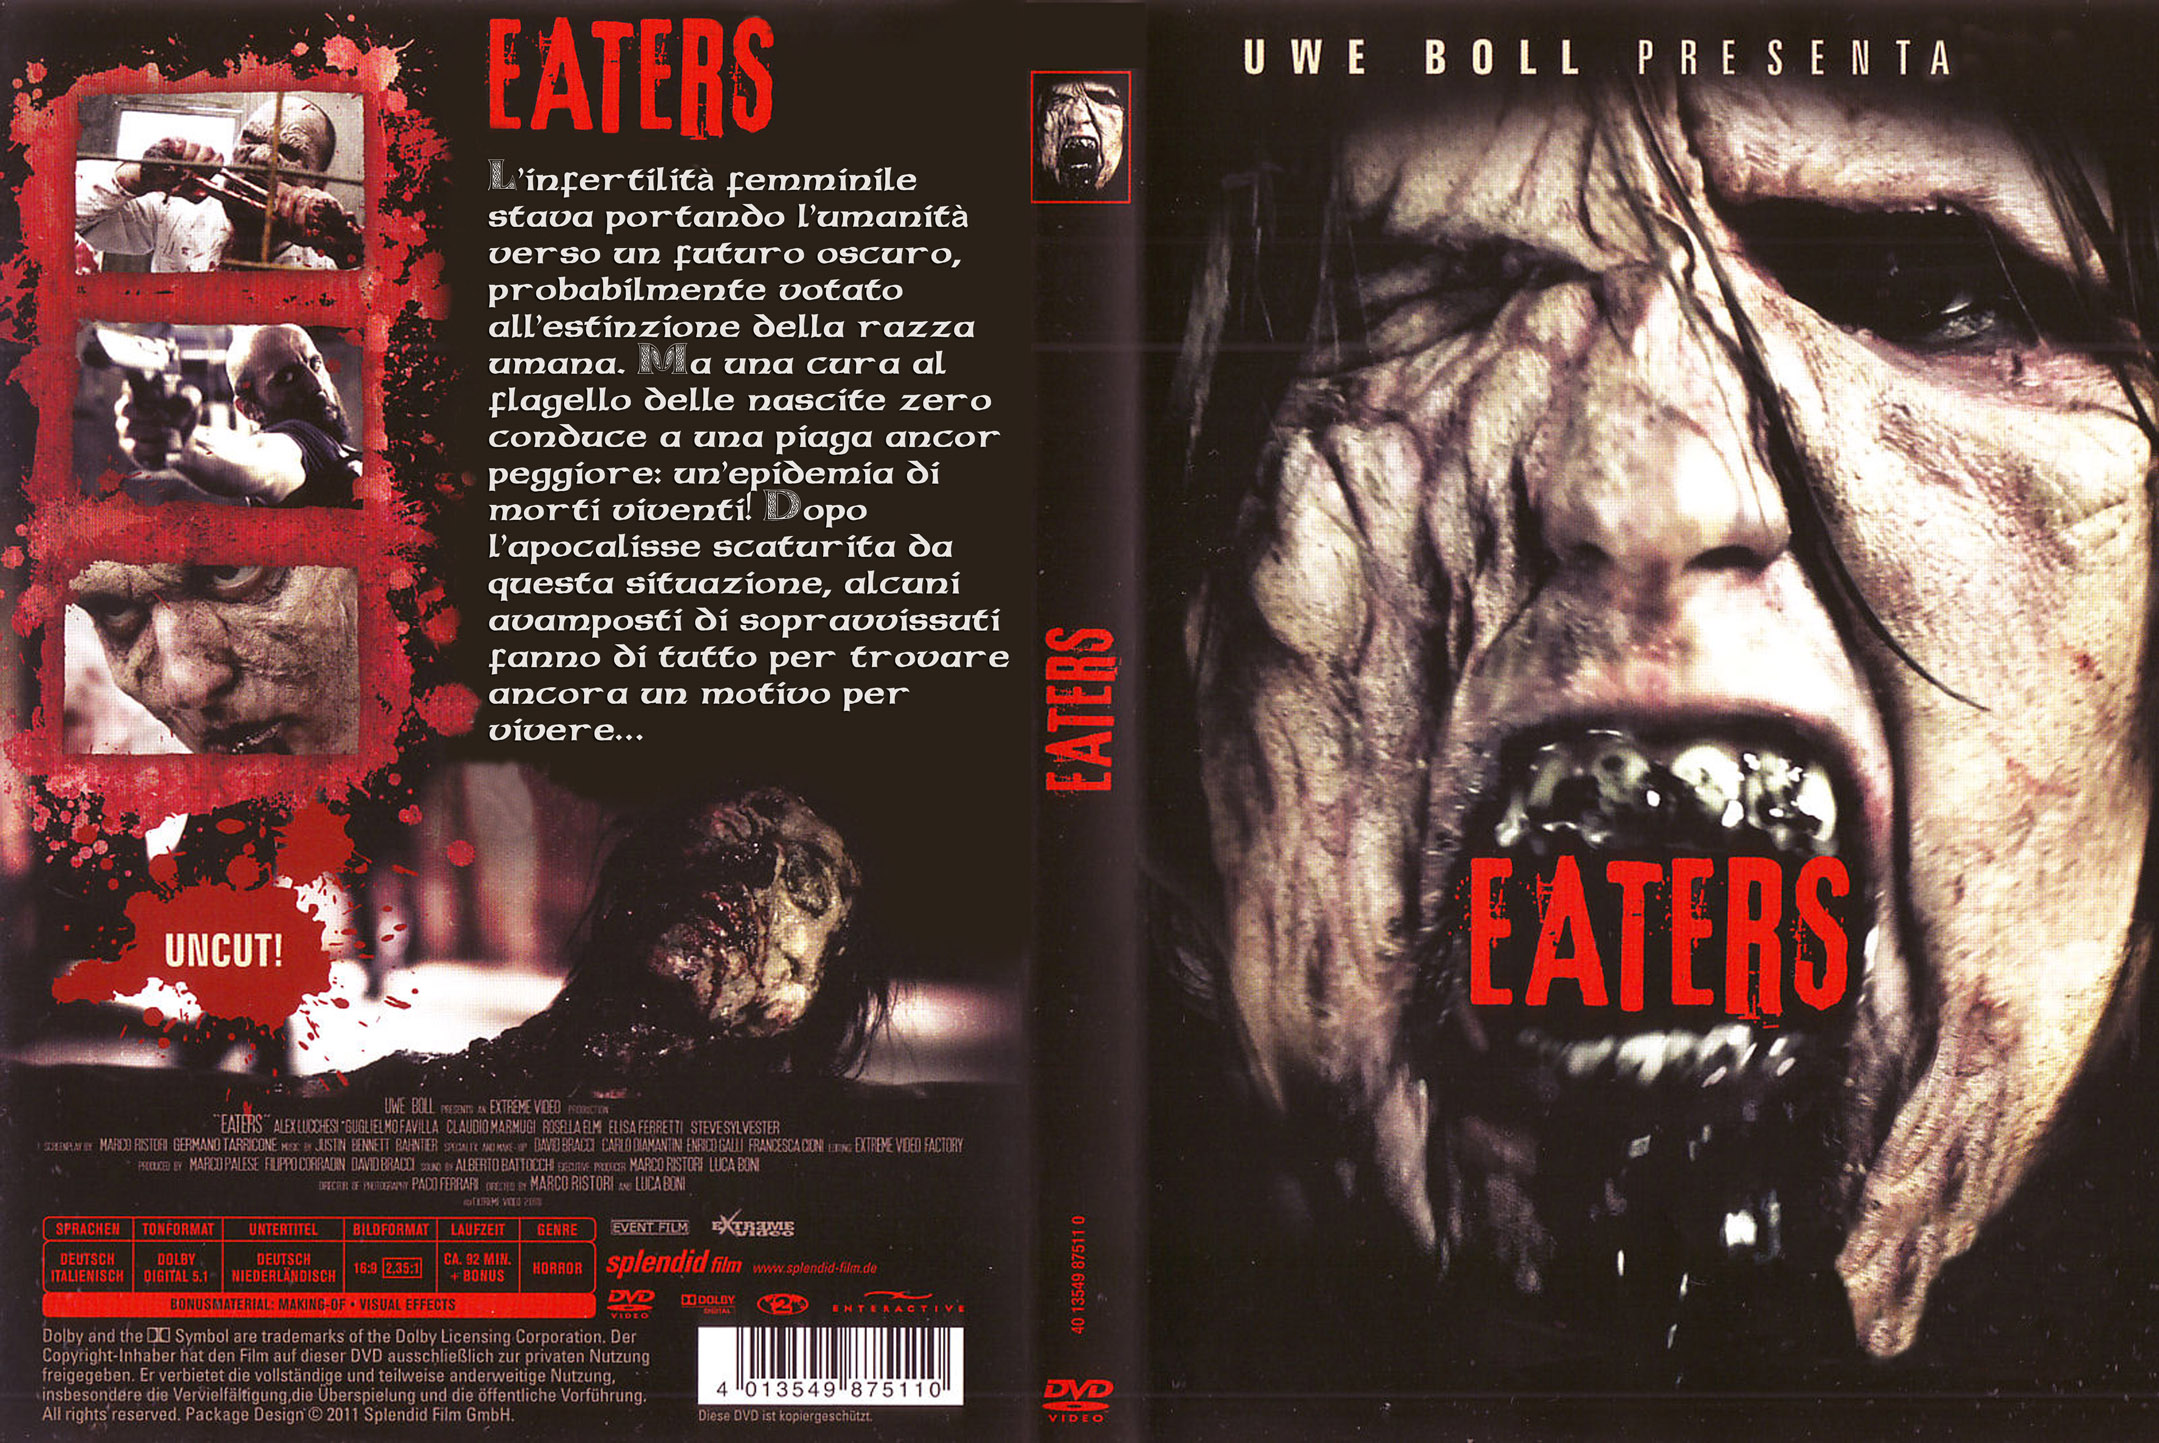 Jaquette DVD Eaters